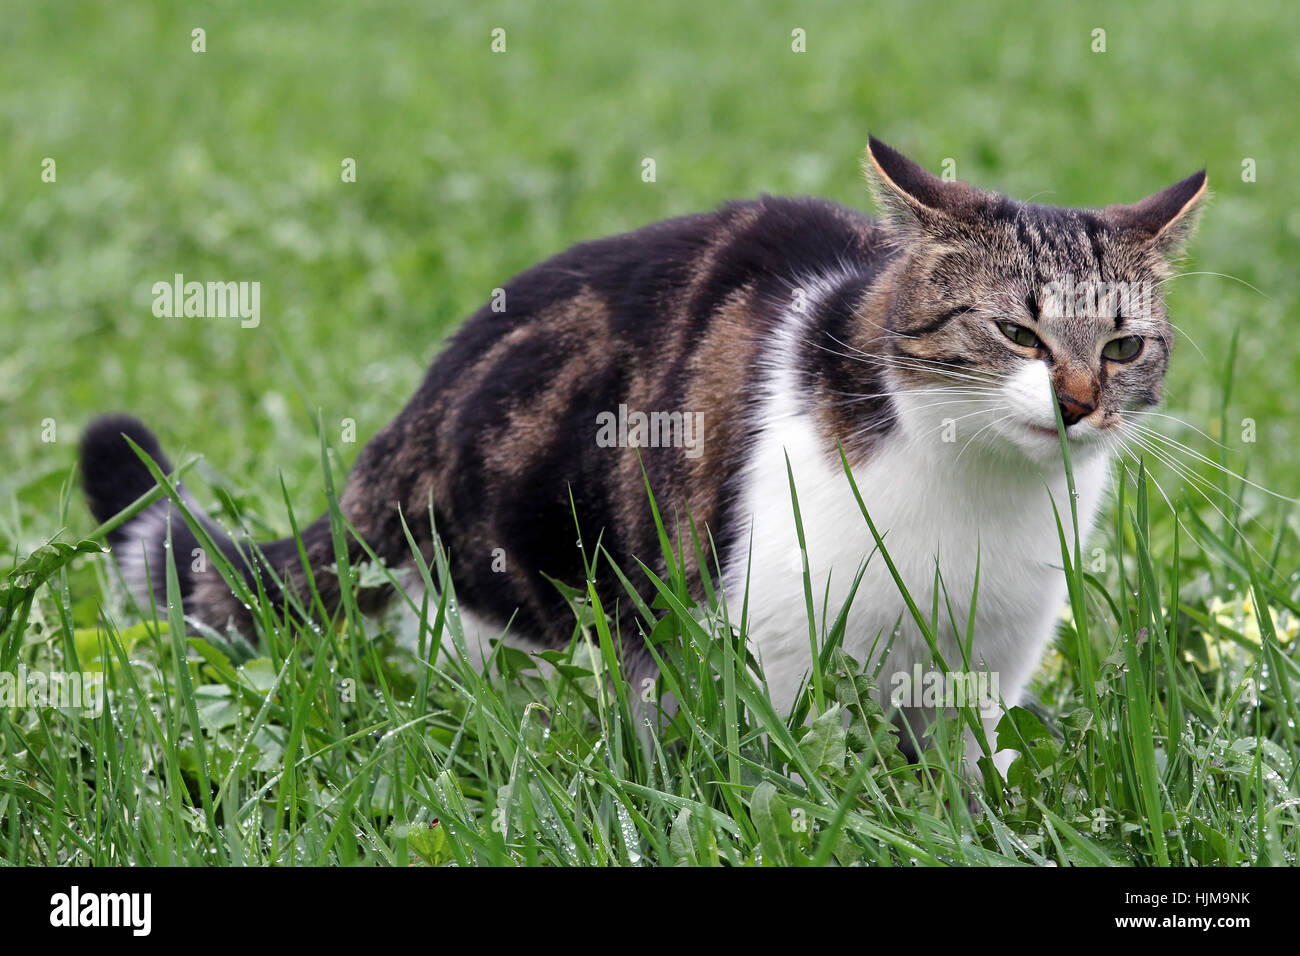 nose, mimic art, smell, sense of smell, meadow, pussycat, cat, domestic cat, Stock Photo